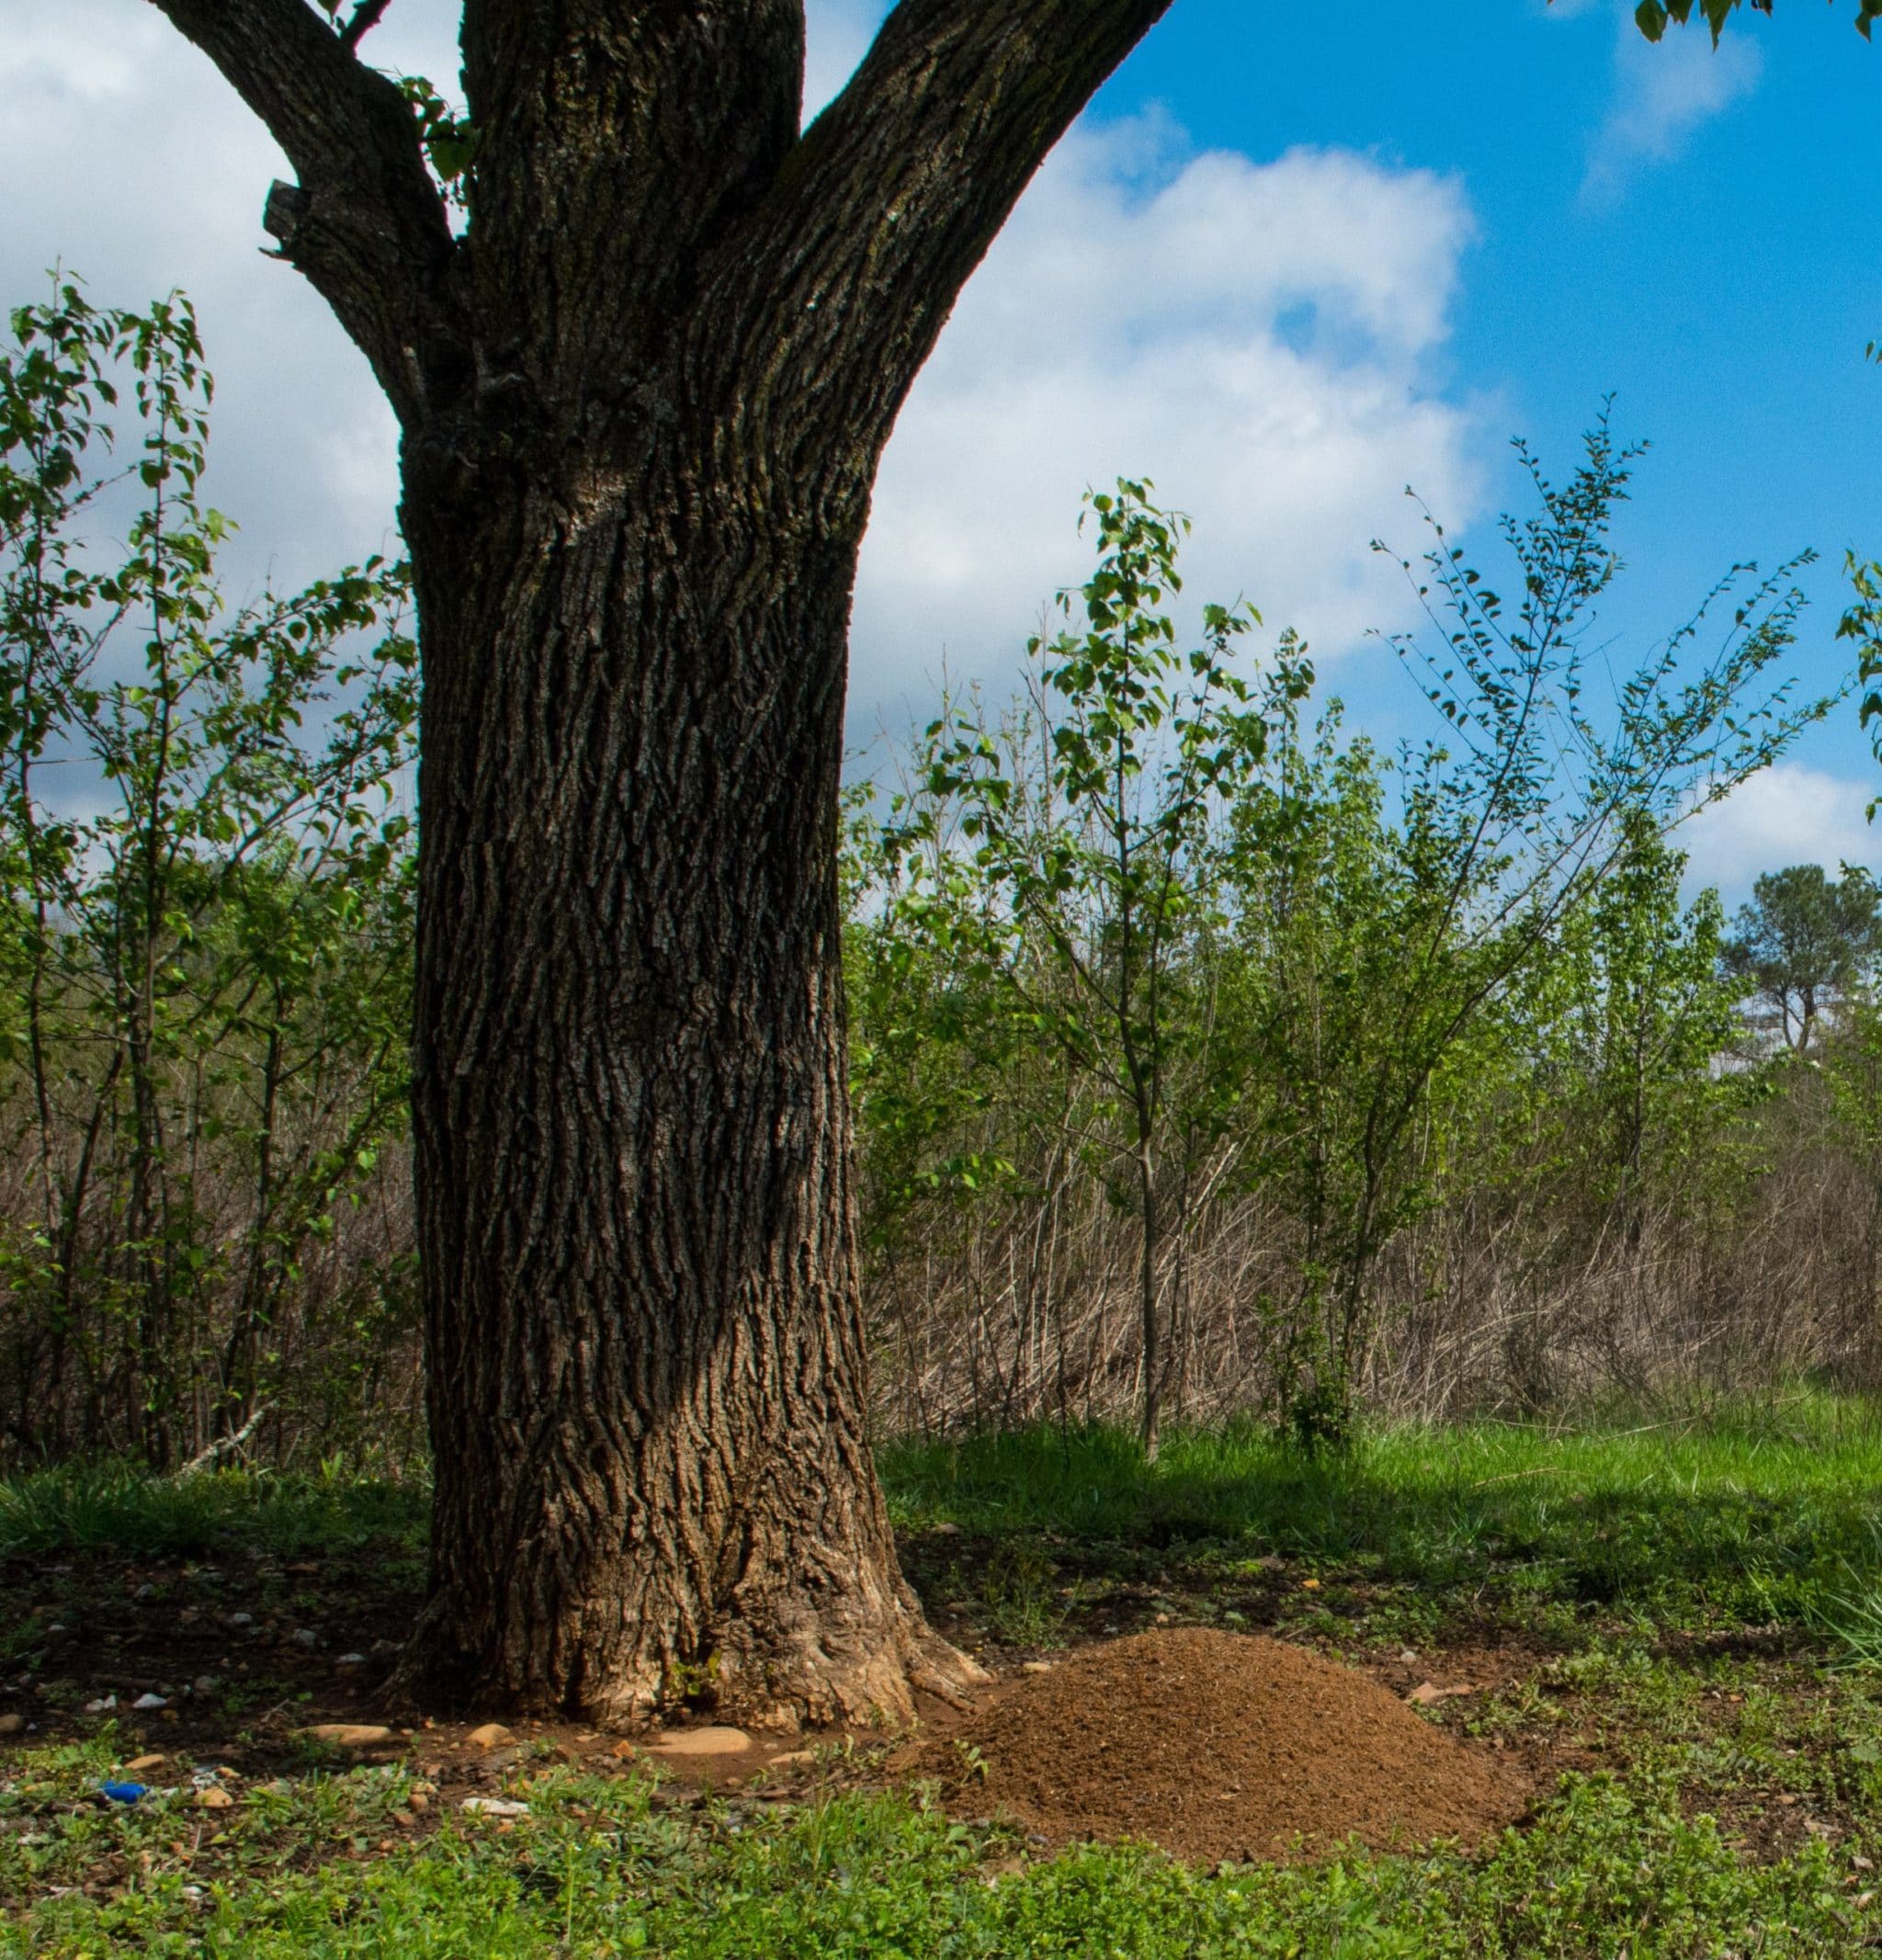 A large Fire Ant mound at the base of a tree at Pigeon Mountain Georgia.